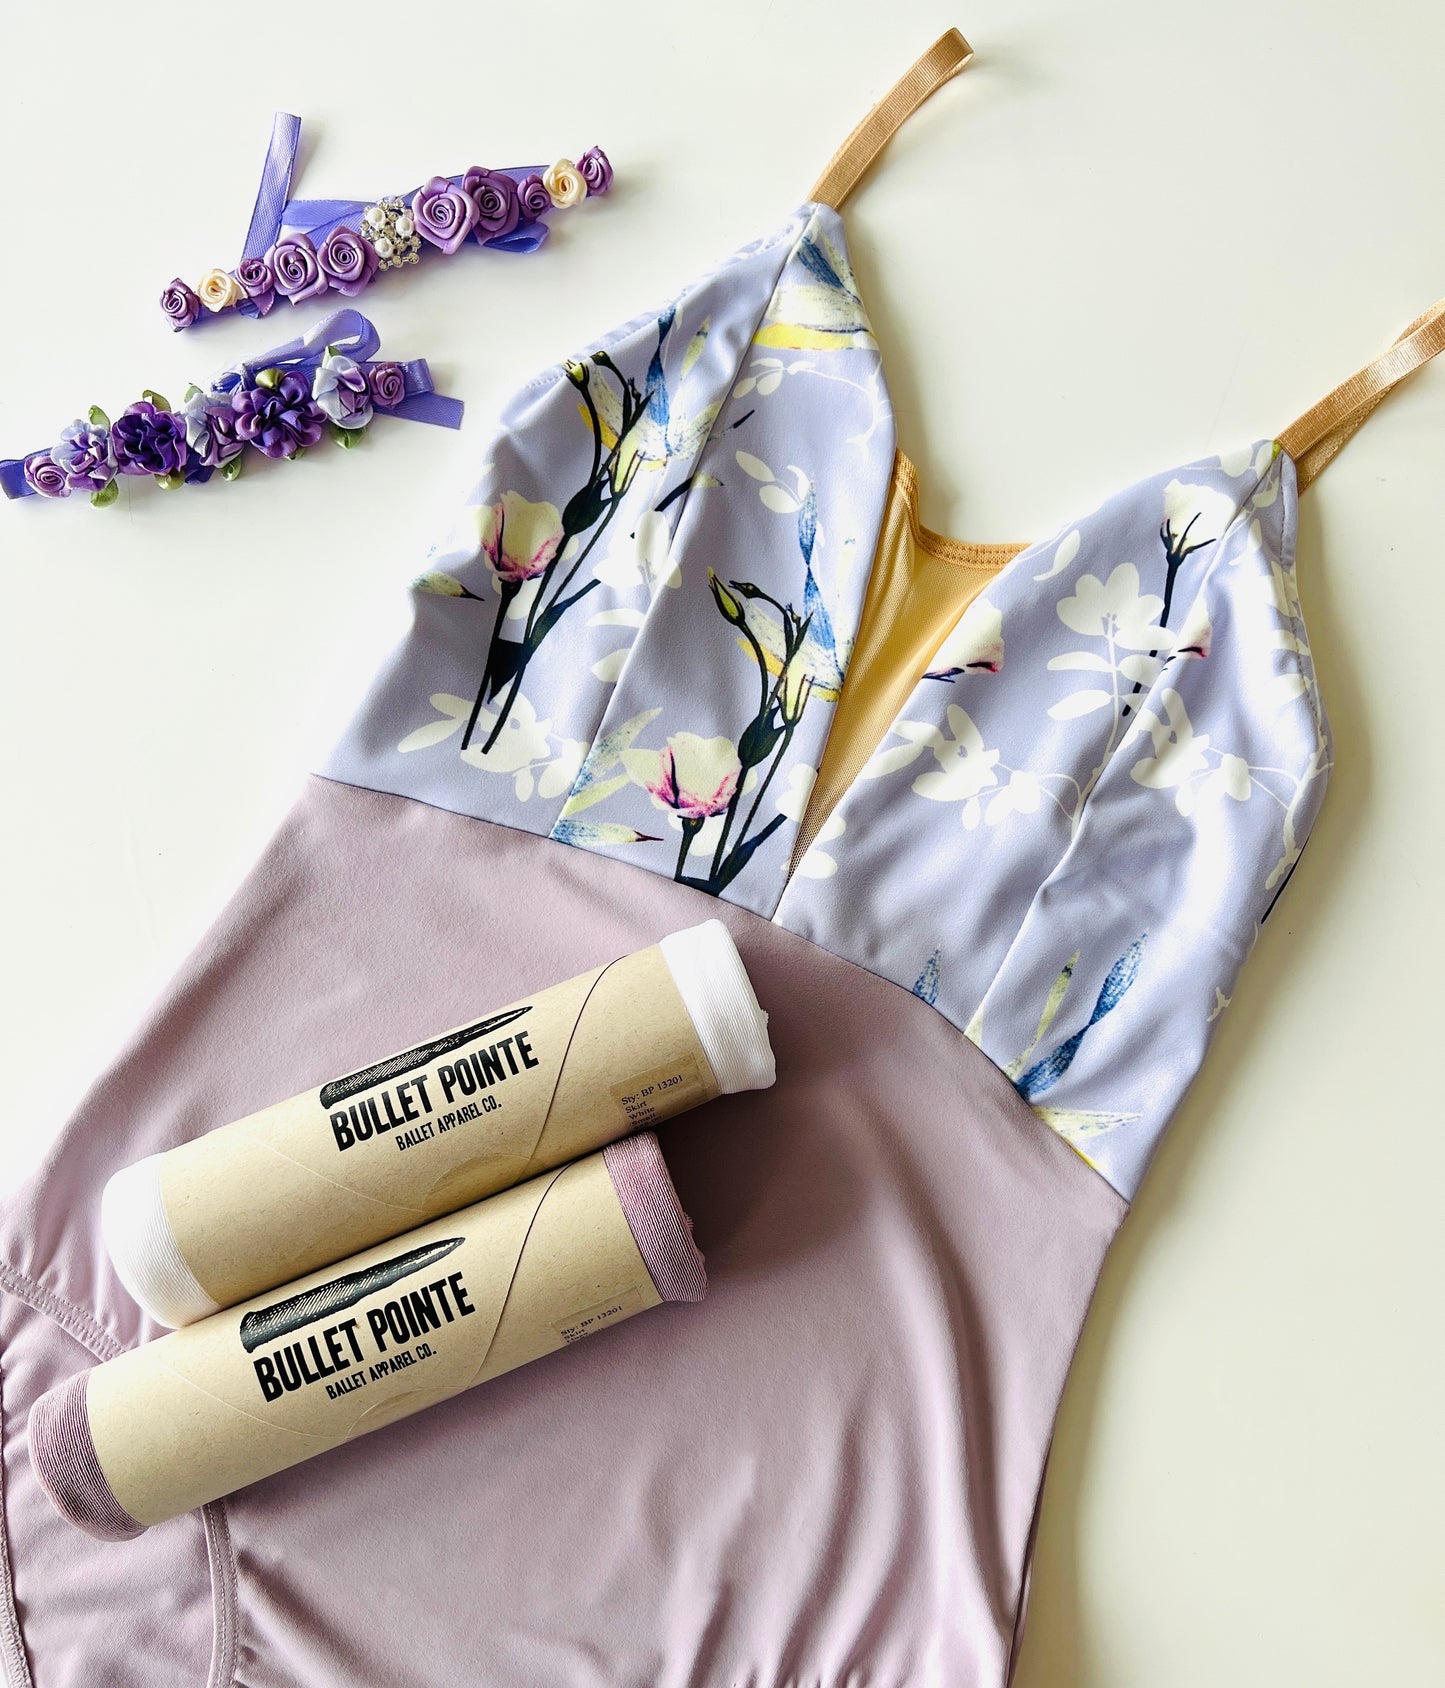 Lilac Meadow camisole ballet leotard from The Collective Dancewear